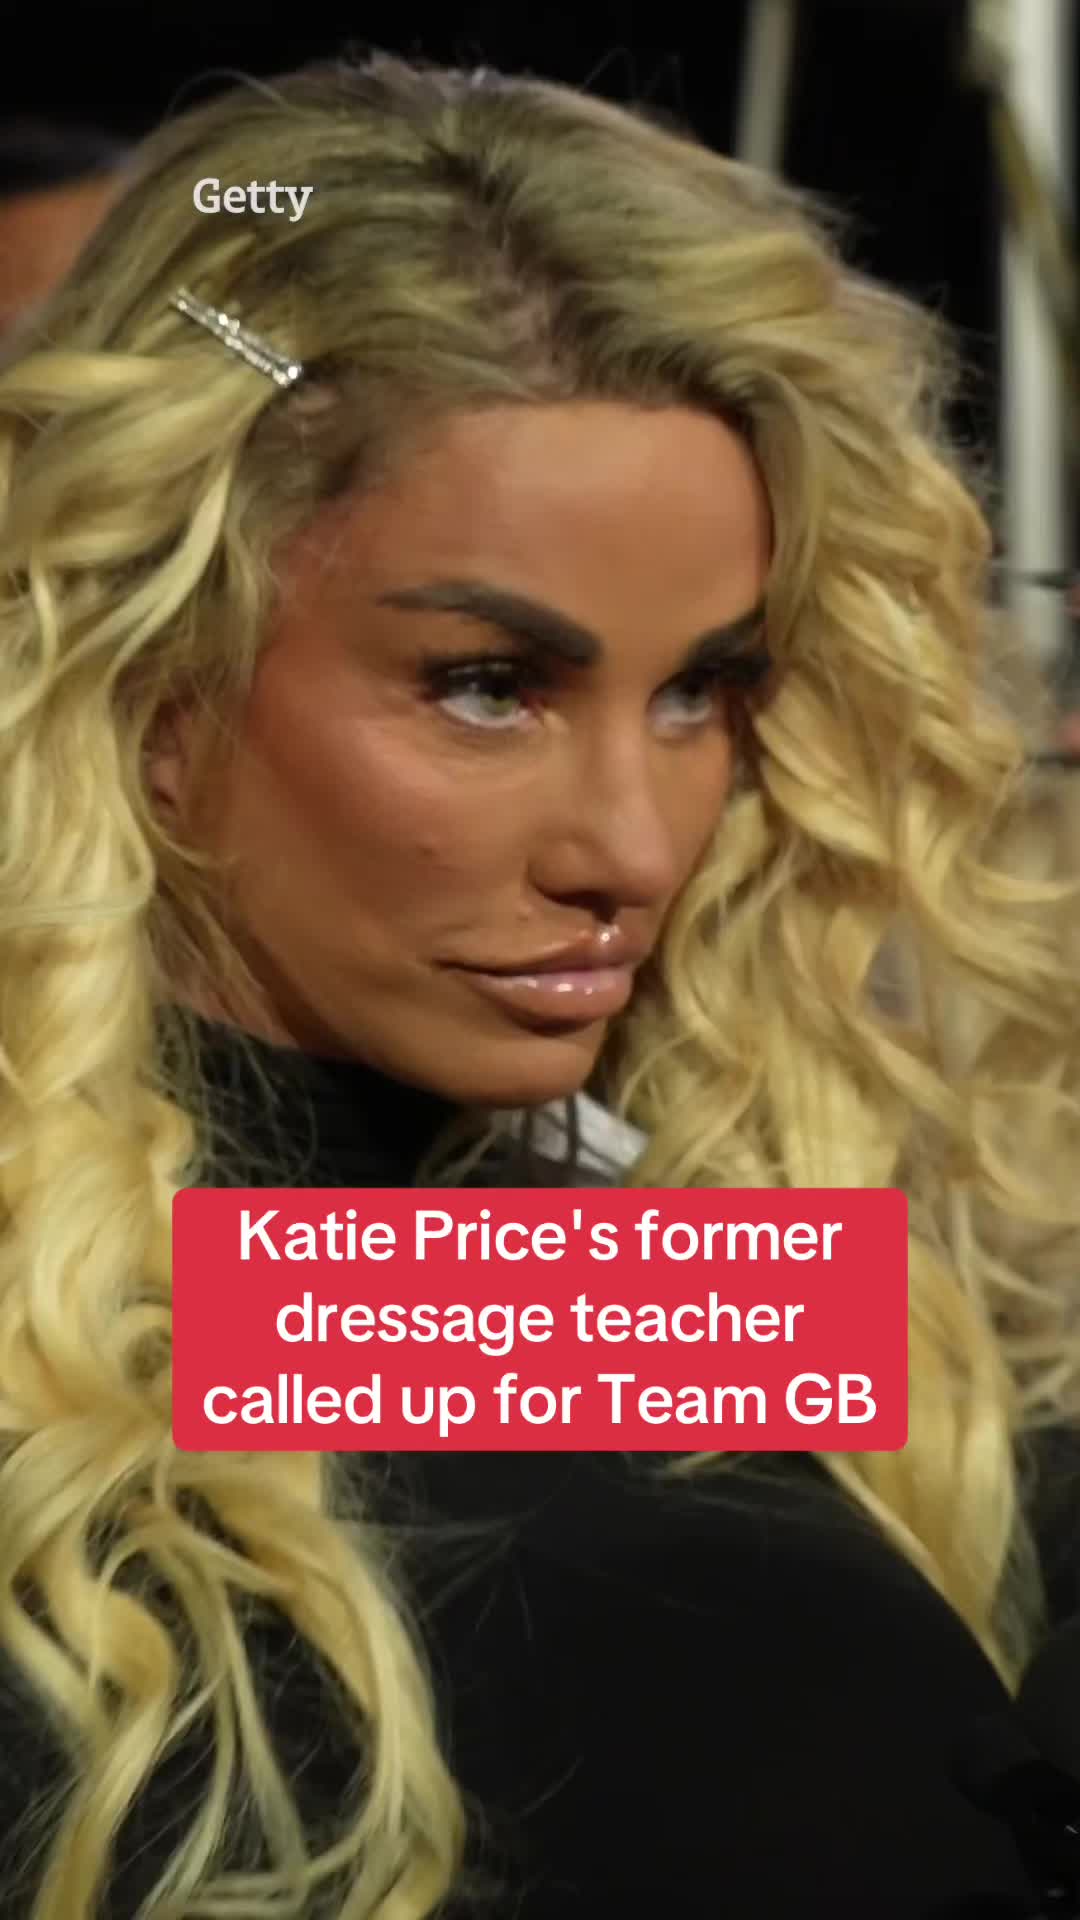 The news comes following Team GB star Charlotte Dujardin's ban over a video of her whipping a horse #katieprice #celebrity #celebritynews #teamgb #olympics #parisolympics2024 #shocking #viral #trending #relationship #celebritytiktok